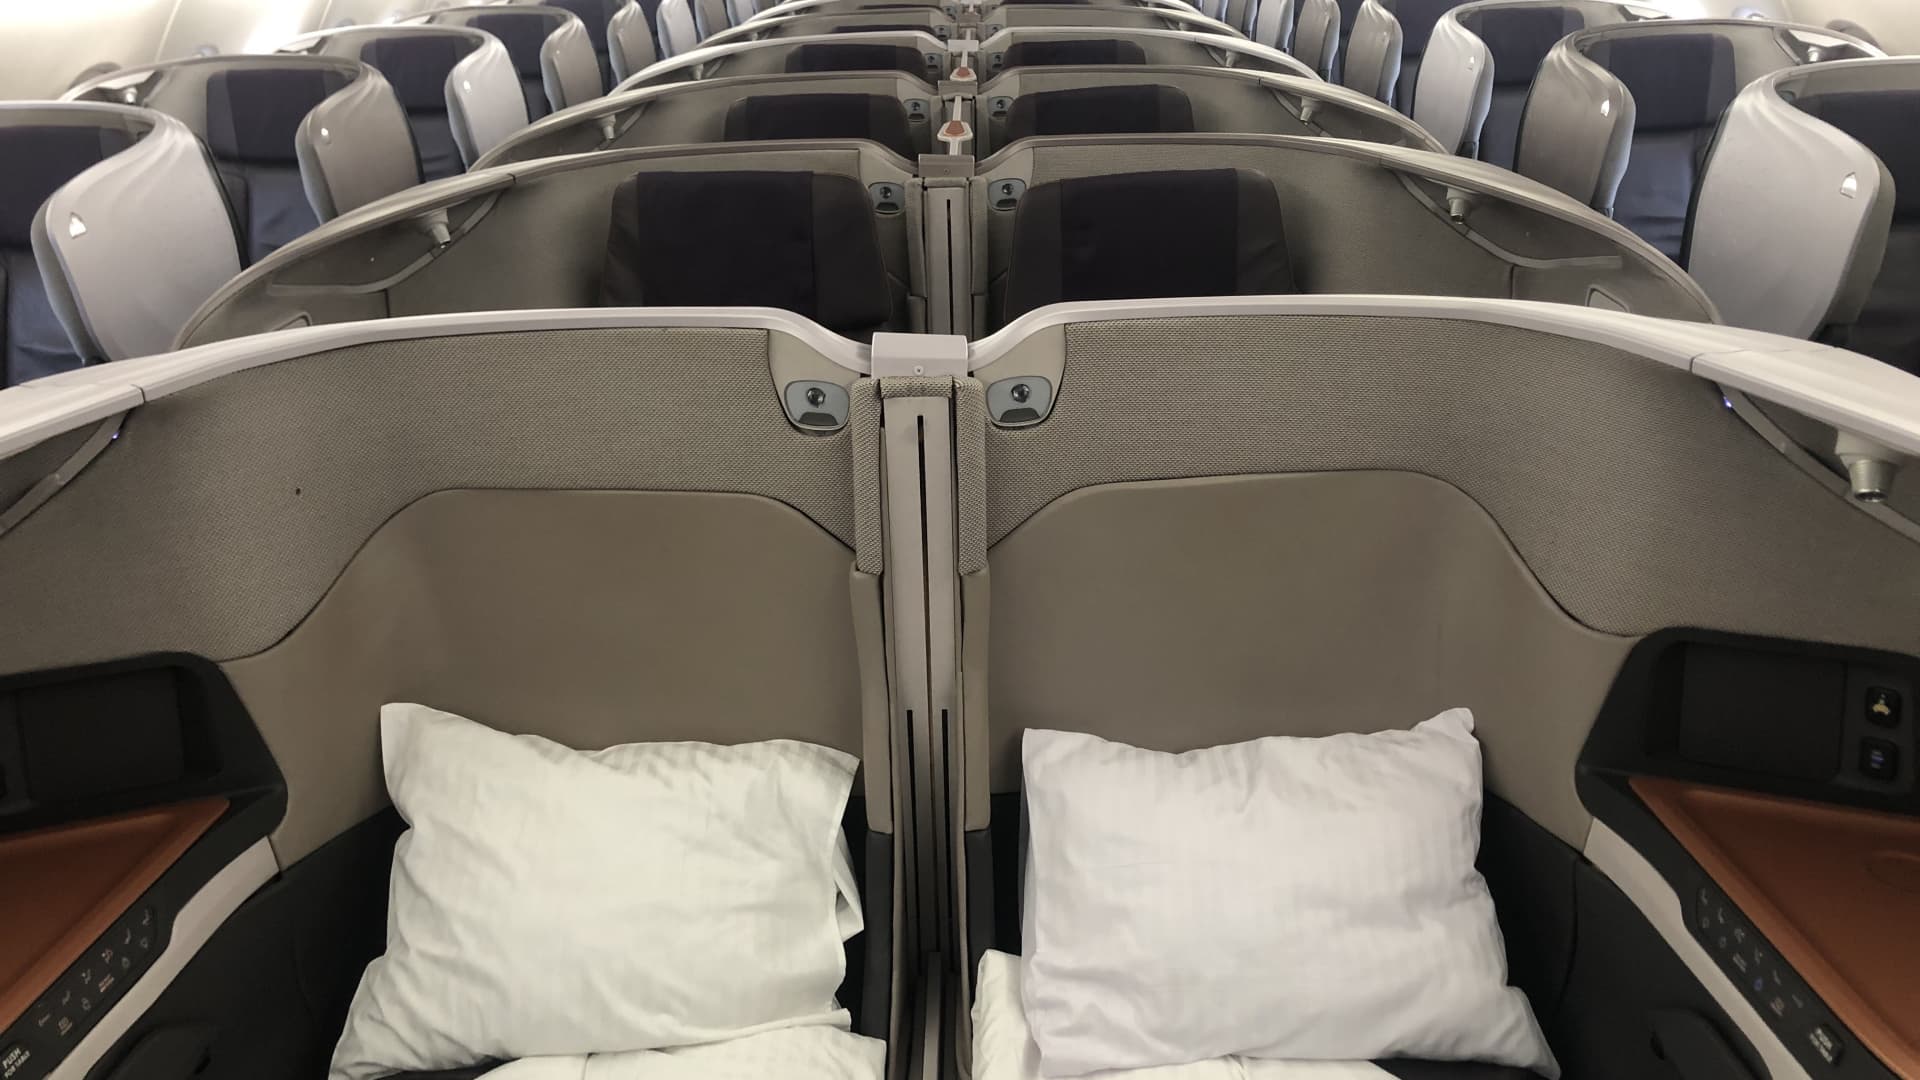 Singapore Airlines latest business class cabin debuts in New York